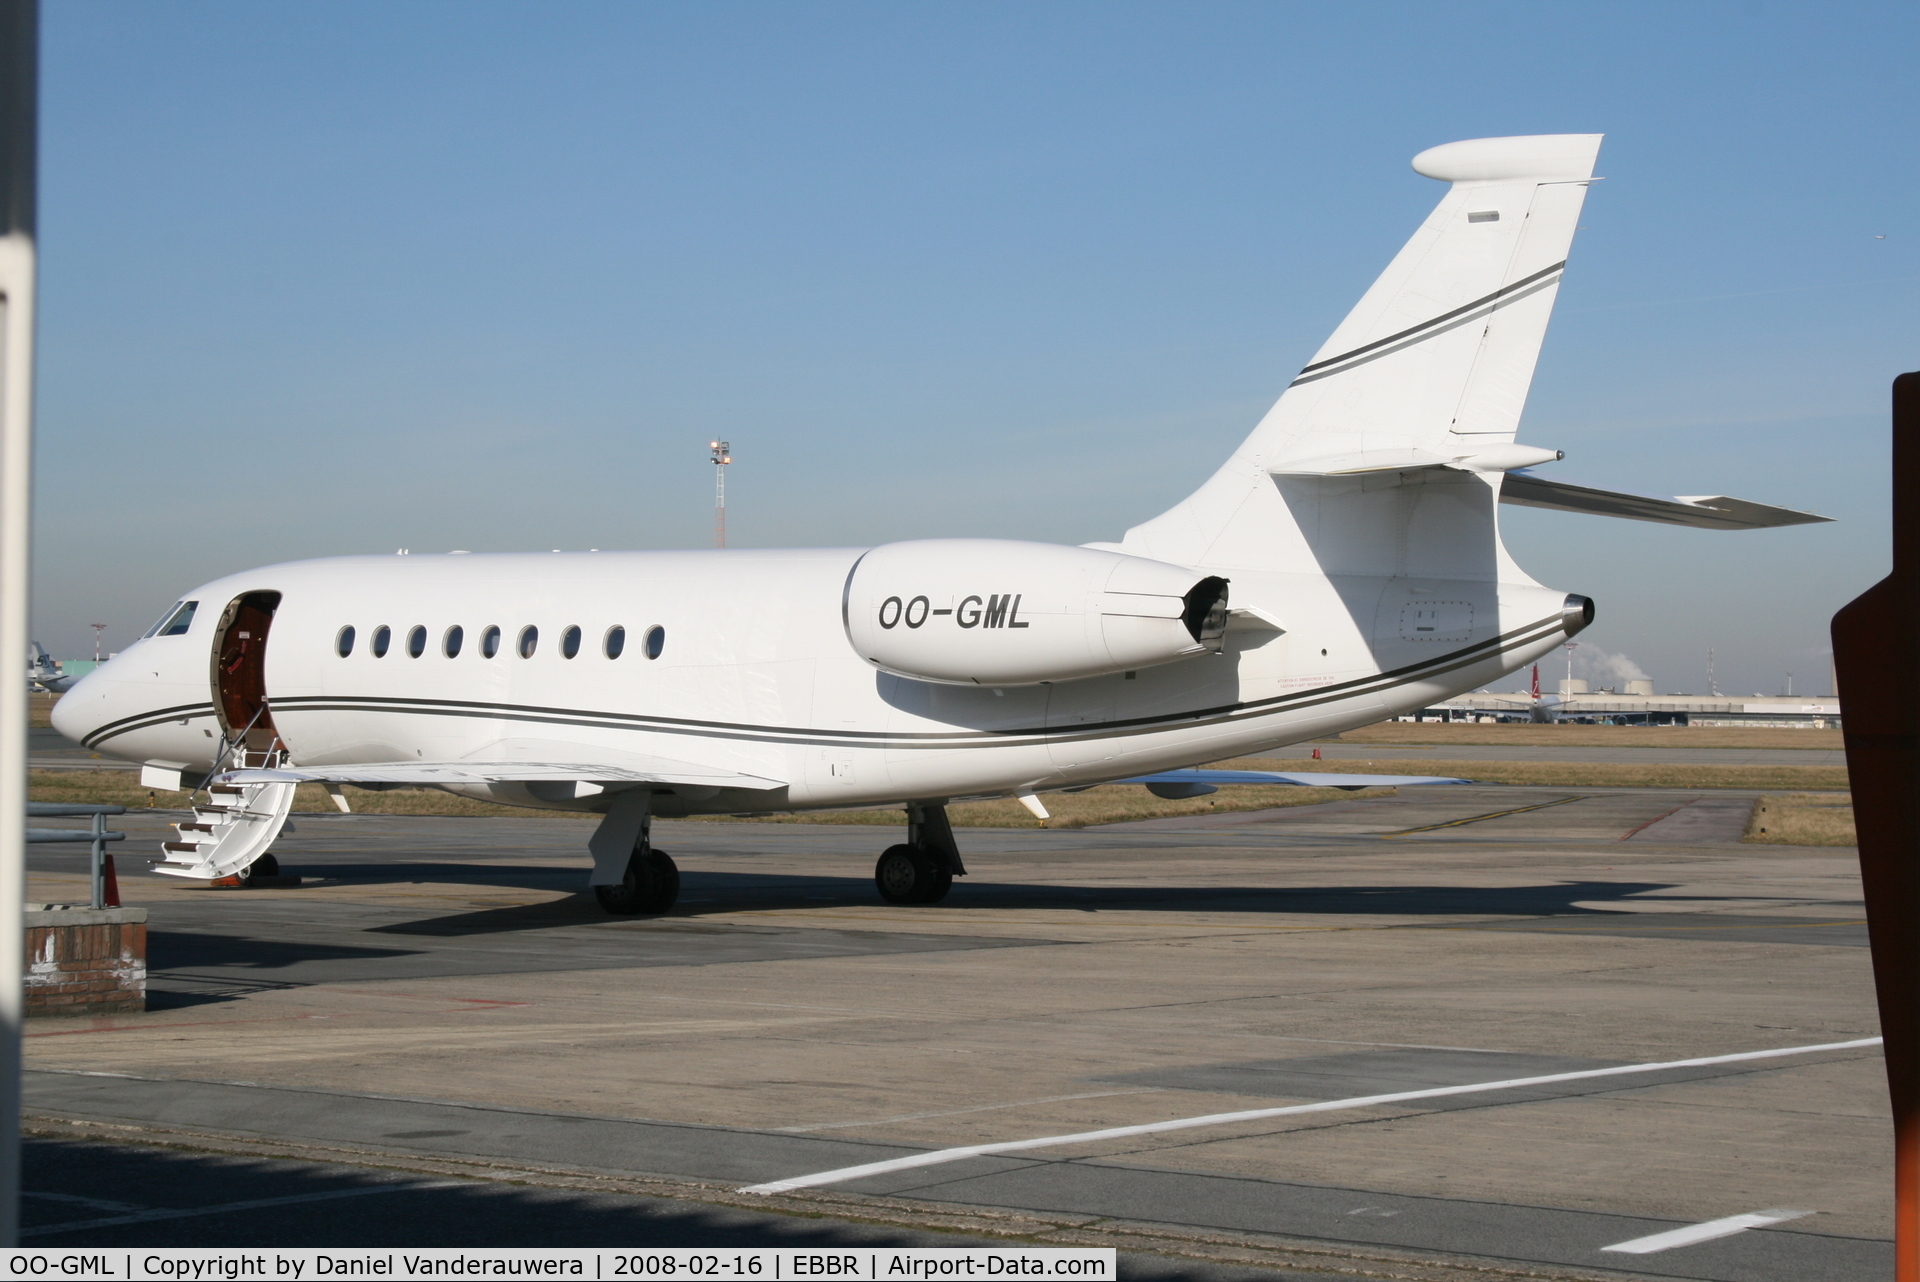 OO-GML, 2005 Dassault Falcon 2000EX C/N 75, parked on G.A. apron